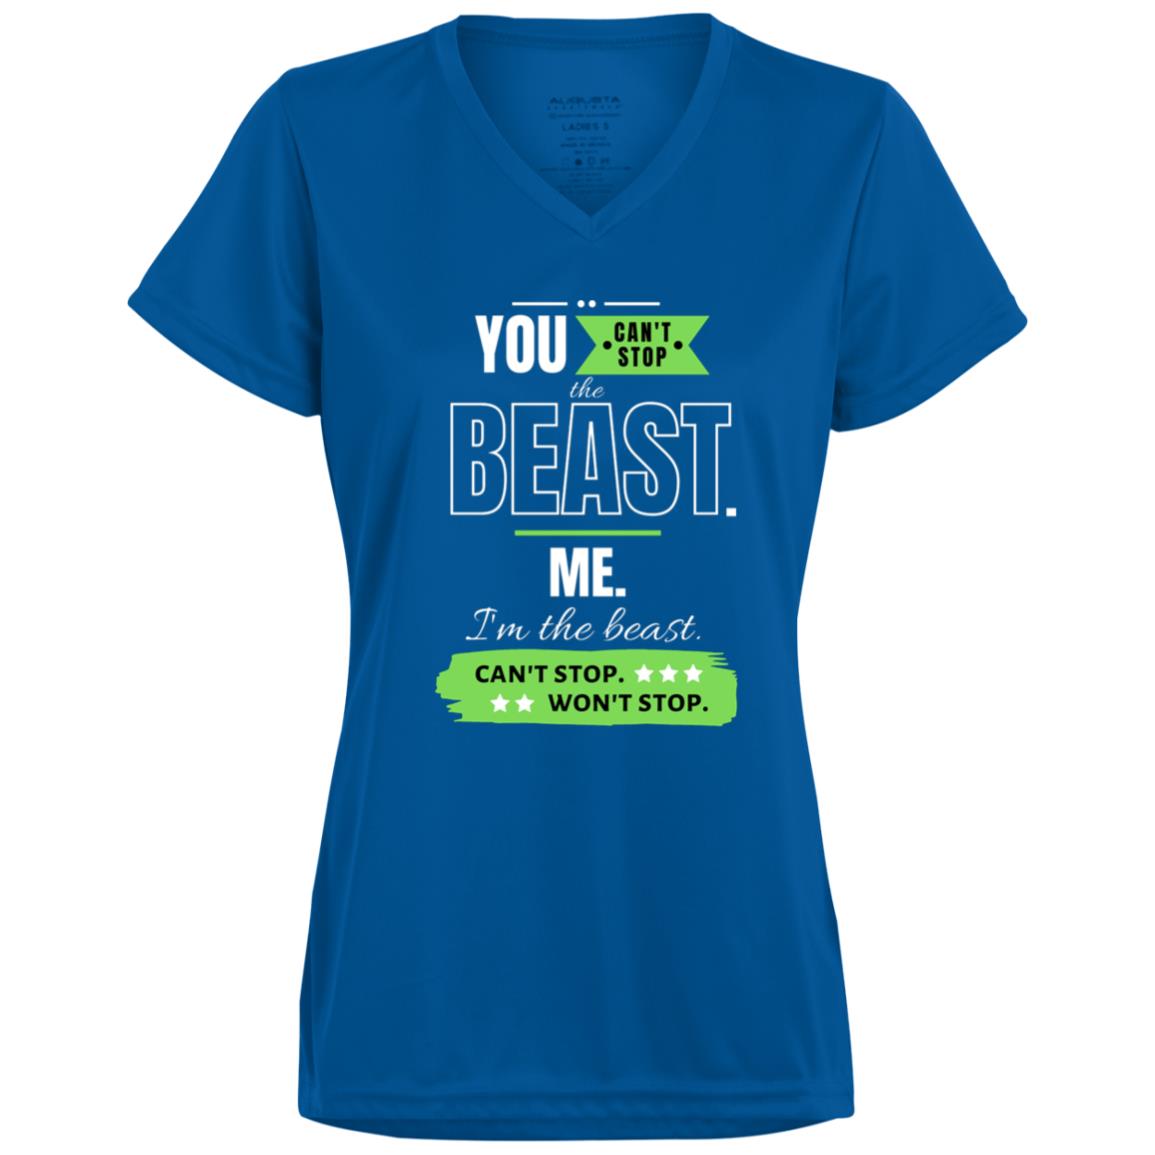 Motivational Ladies’ Moisture-Wicking V-Neck Tee: Can't stop the beast